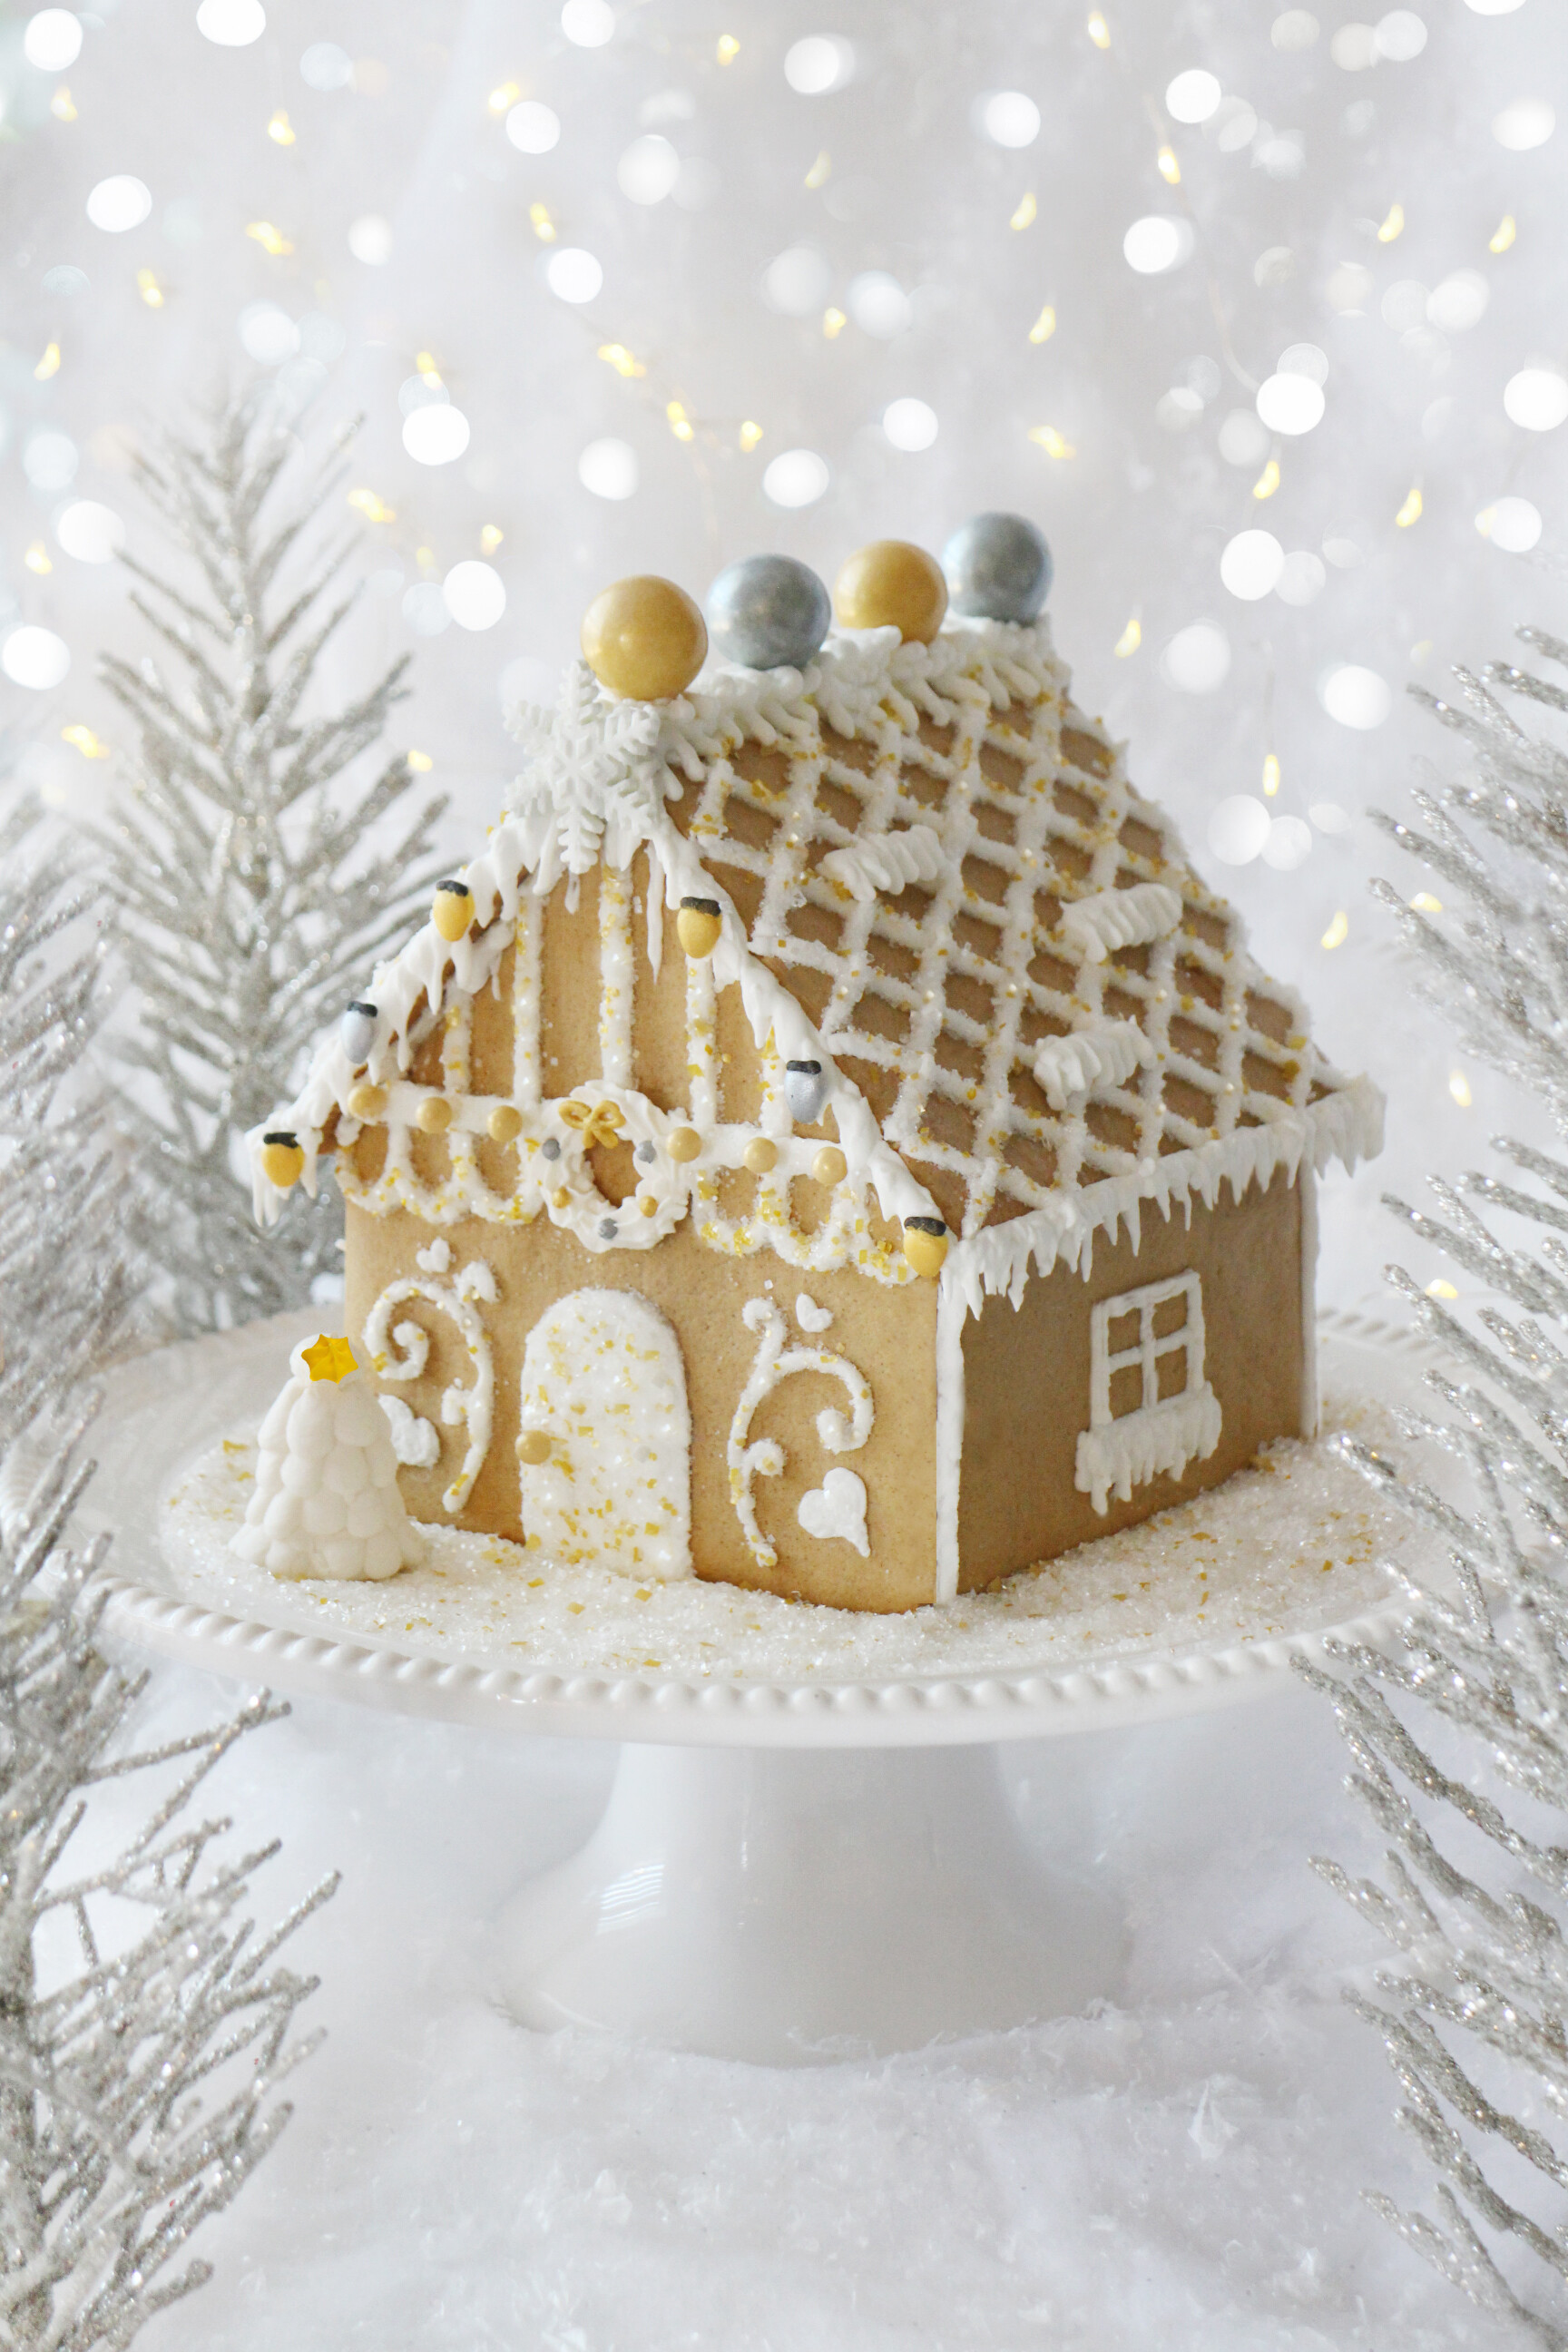 Gingerbread House: Glittering, Ice decorations, A coating of powdered sugar snow, Cookie construction. 1730x2600 HD Wallpaper.